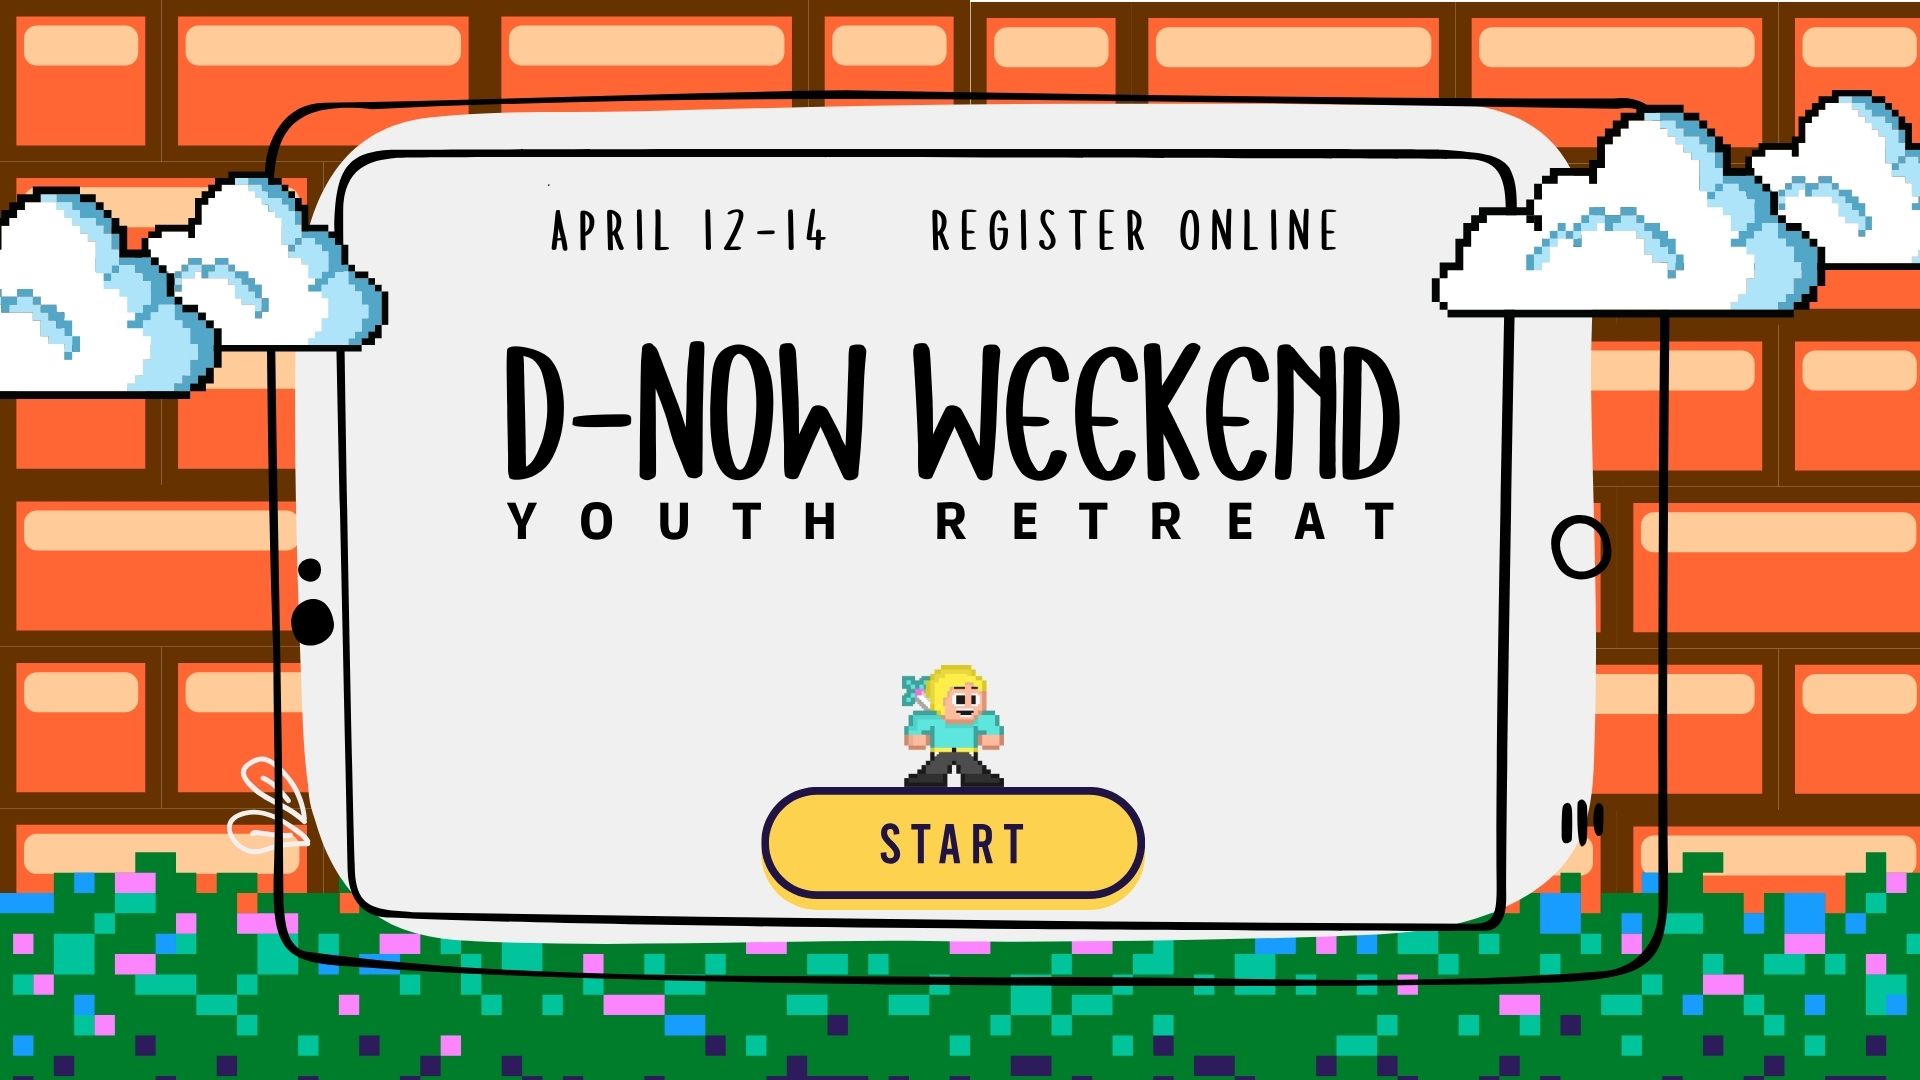 D-Now weekend image